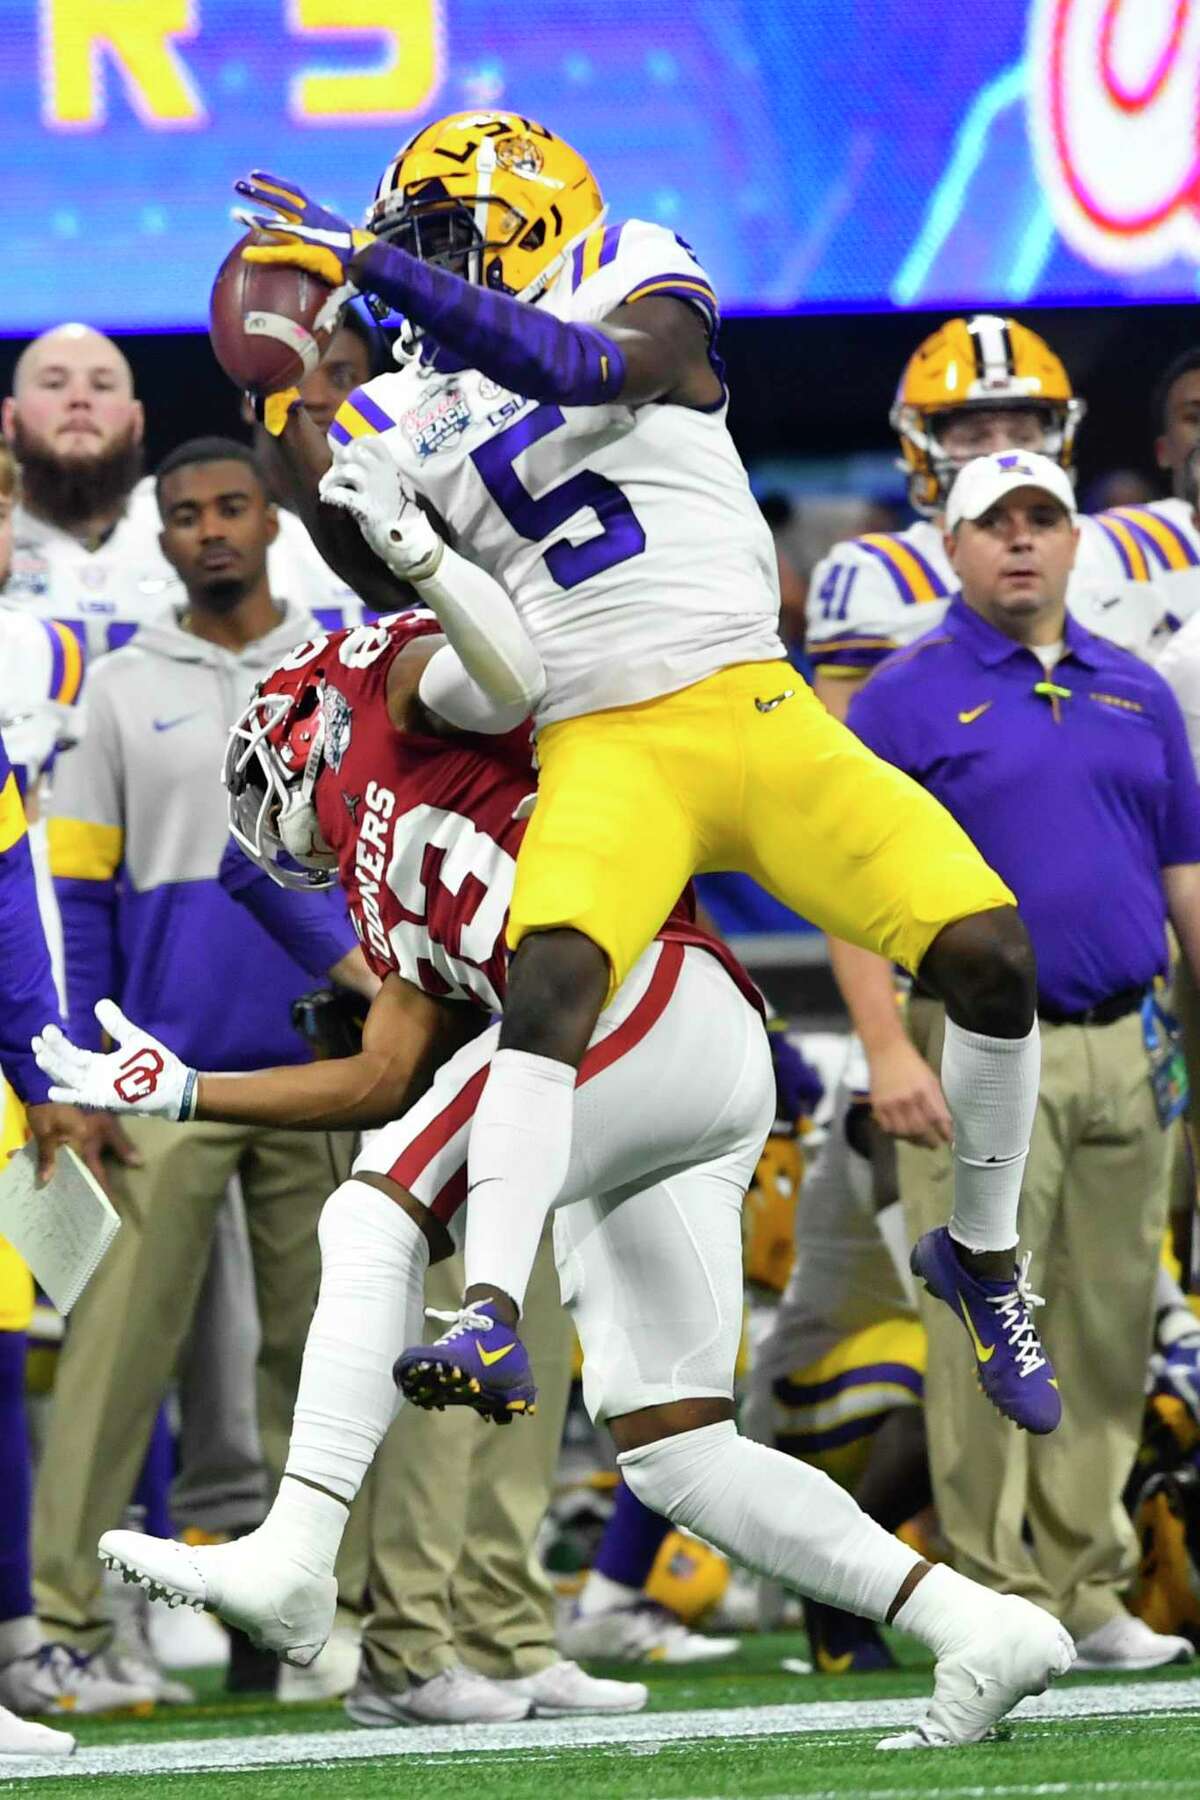 LSU cornerback Kary Vincent Jr. (5) picks off a ball intended for Oklahoma wide receiver Nick Basquine (83) during the first half of the Peach Bowl NCAA semifinal college football playoff game, Saturday, Dec. 28, 2019, in Atlanta. (AP Photo/John Amis)